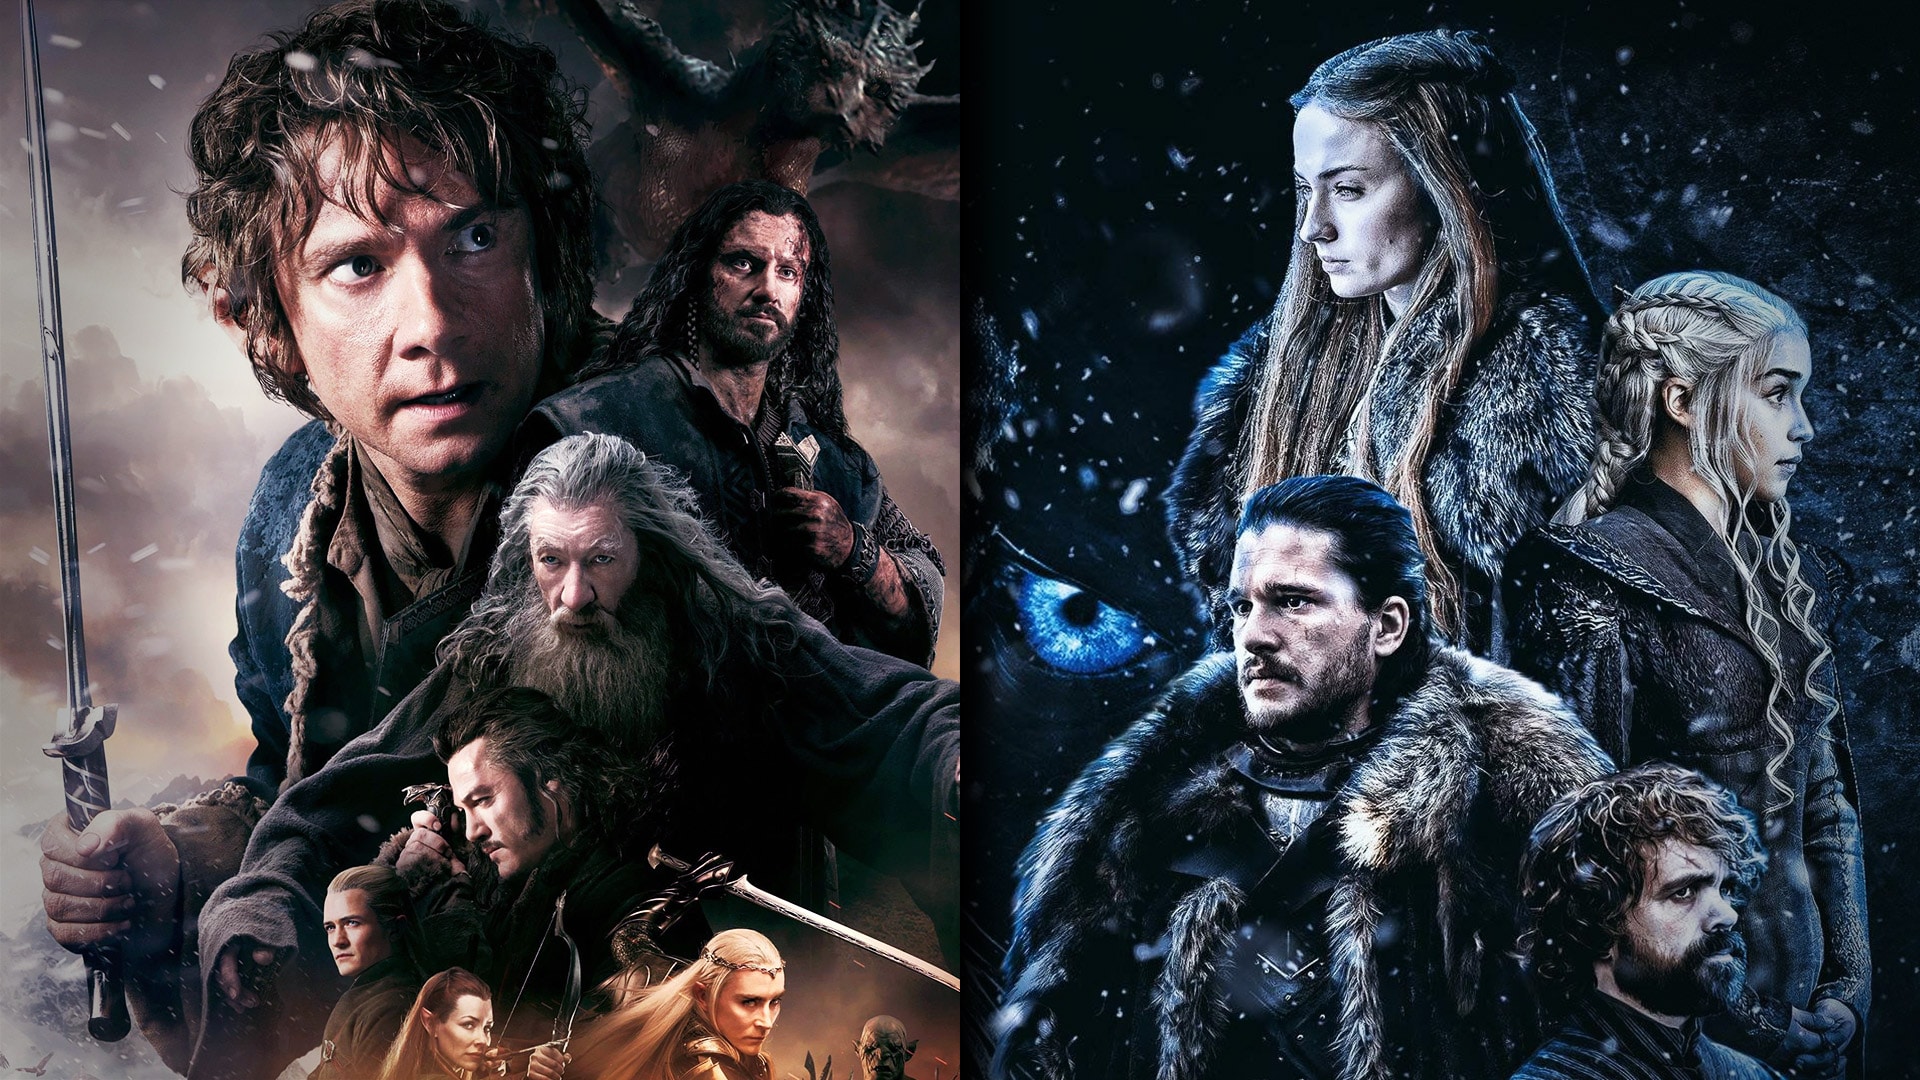 5 Reasons LOTR is the Best High Fantasy Series (& 5 Reasons its Game of Thrones)